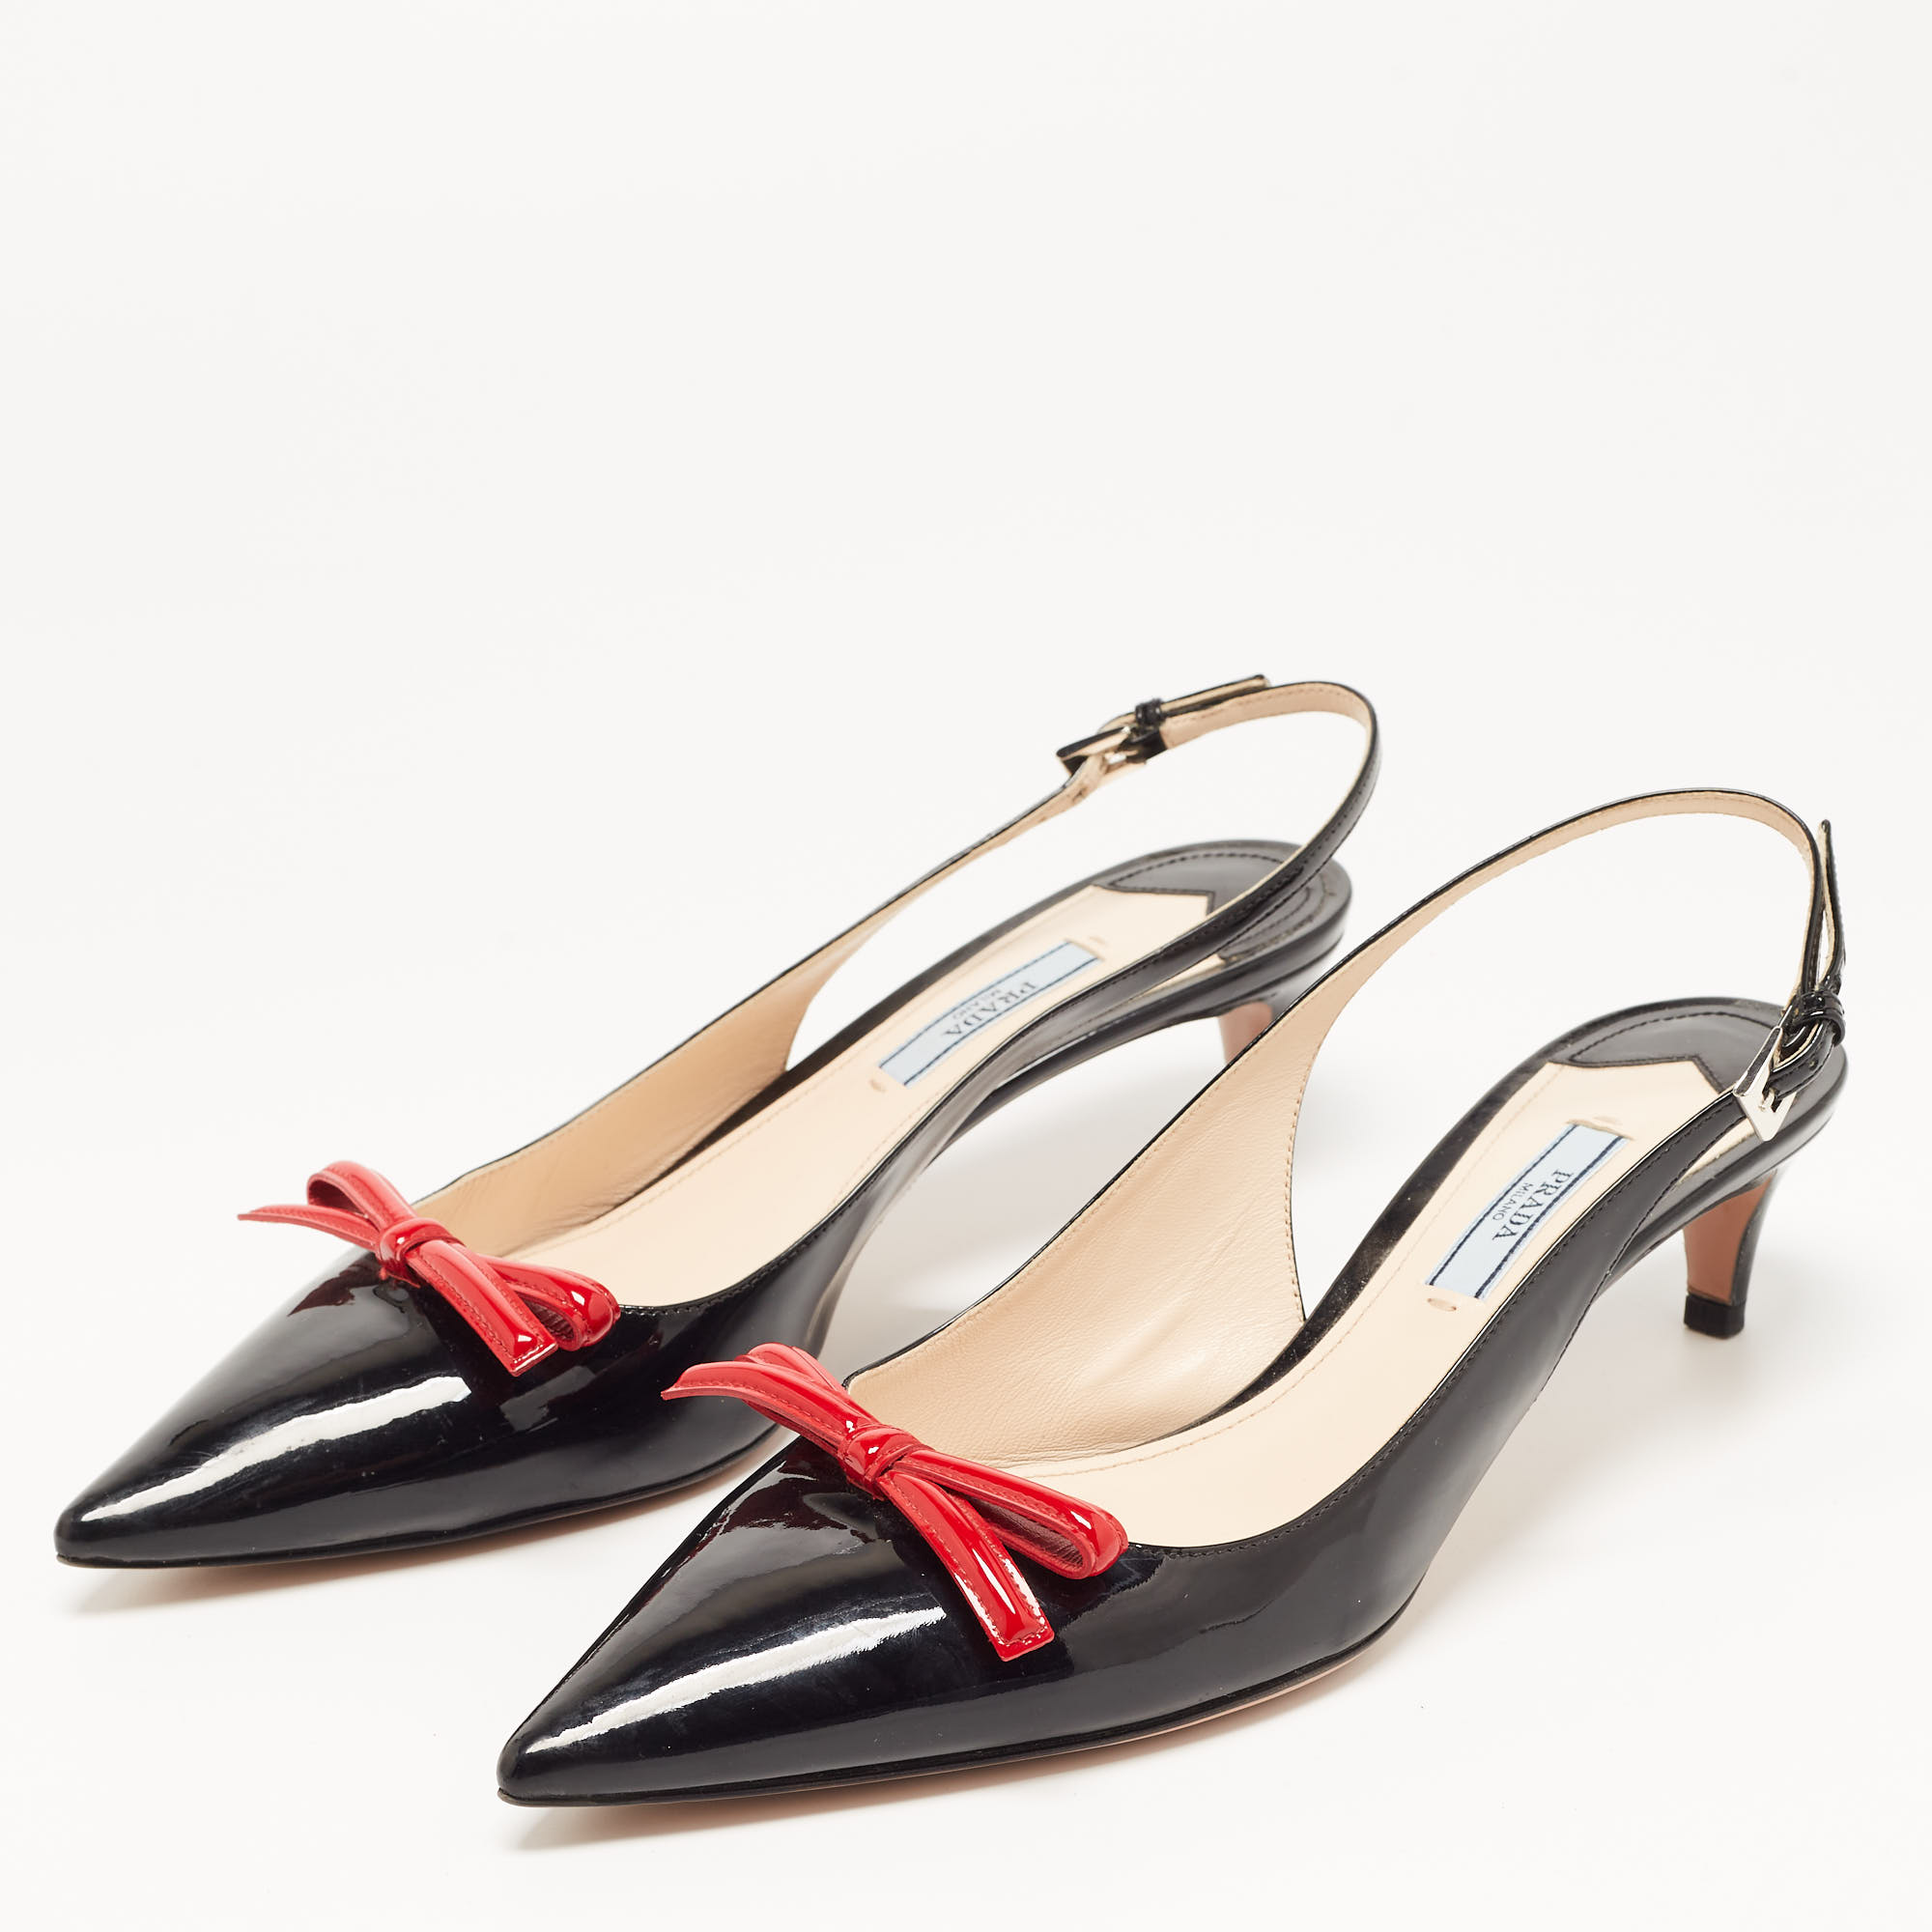 

Prada Black/Red Patent Leather Bow Pointed Toe Slingback Sandals Size